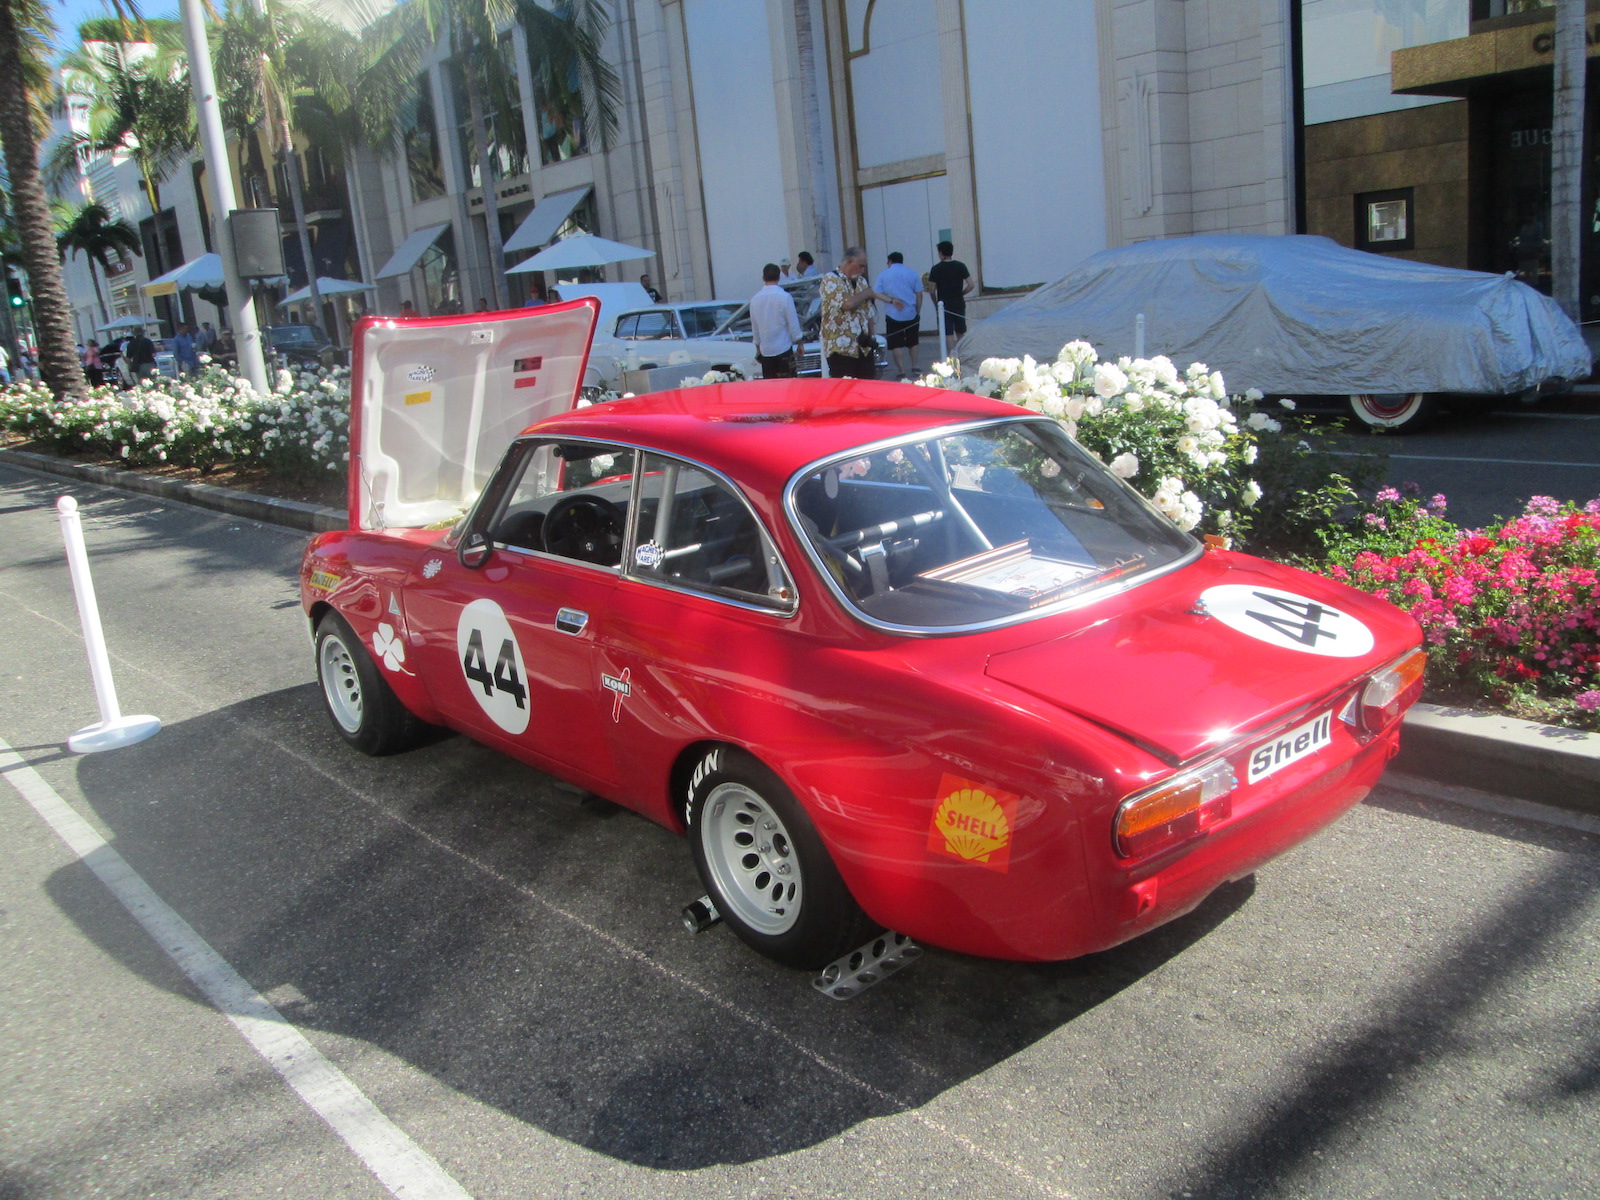 The Rodeo Drive Concours d'Elegance 2016